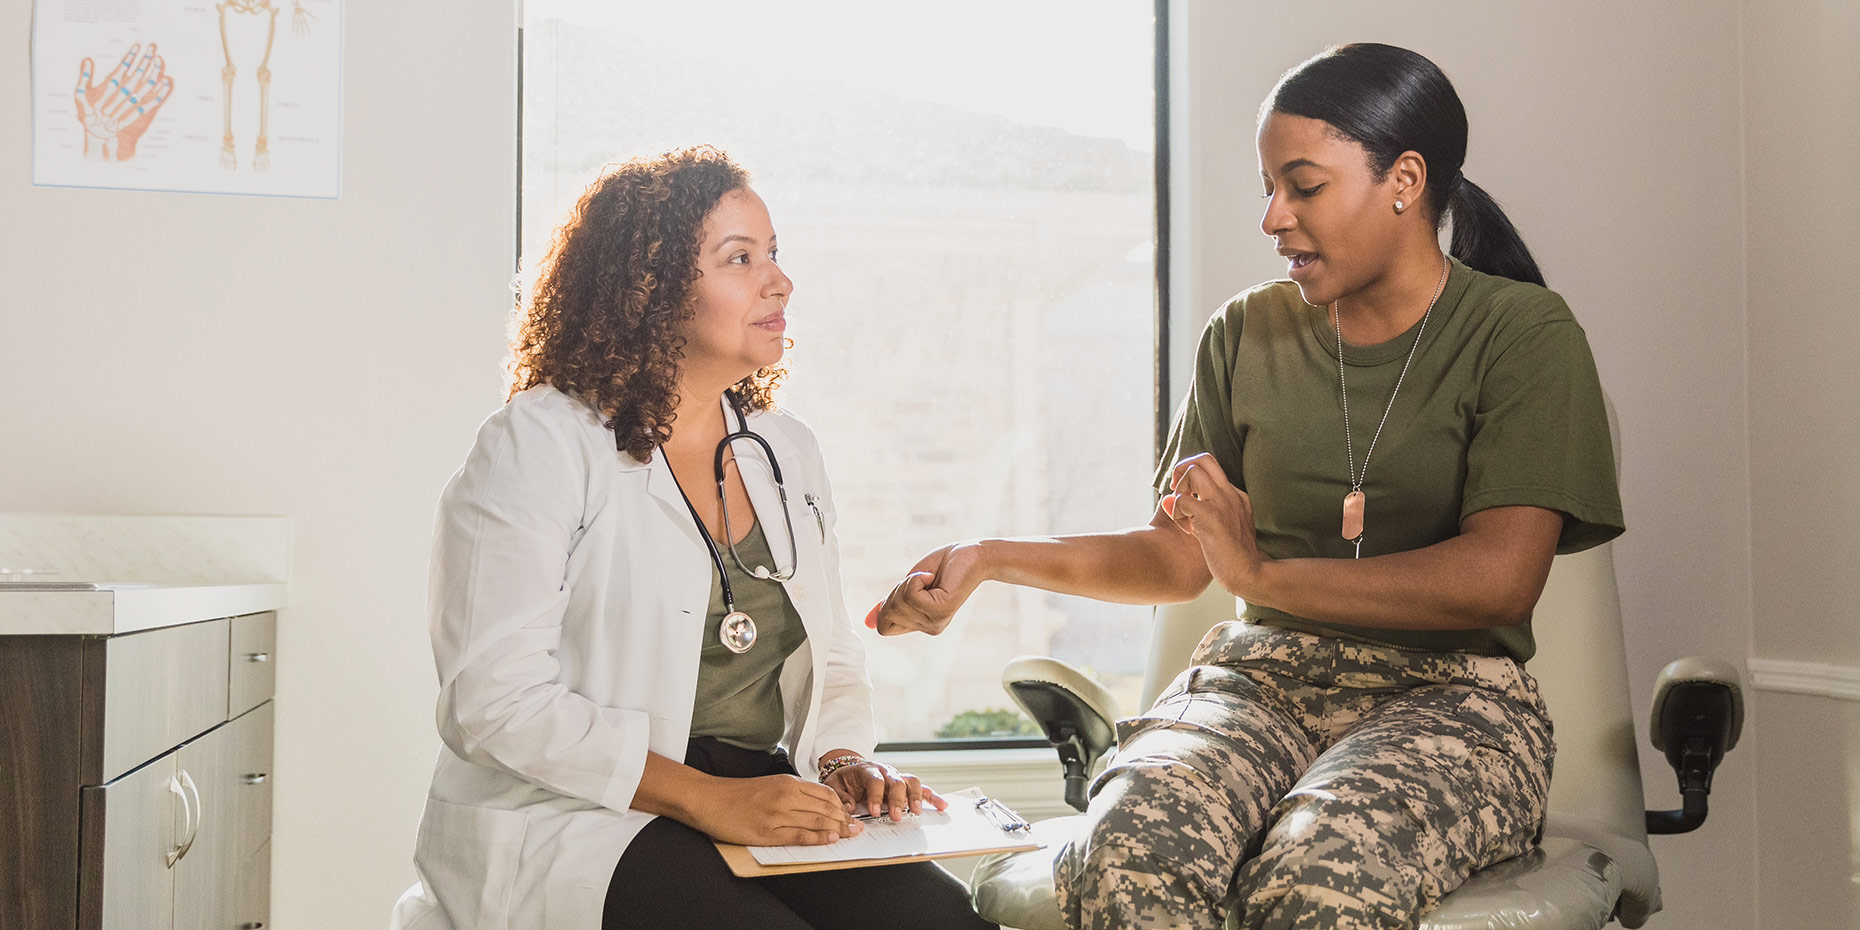 Doctor looking at woman in military uniform while she talks and points to her arm